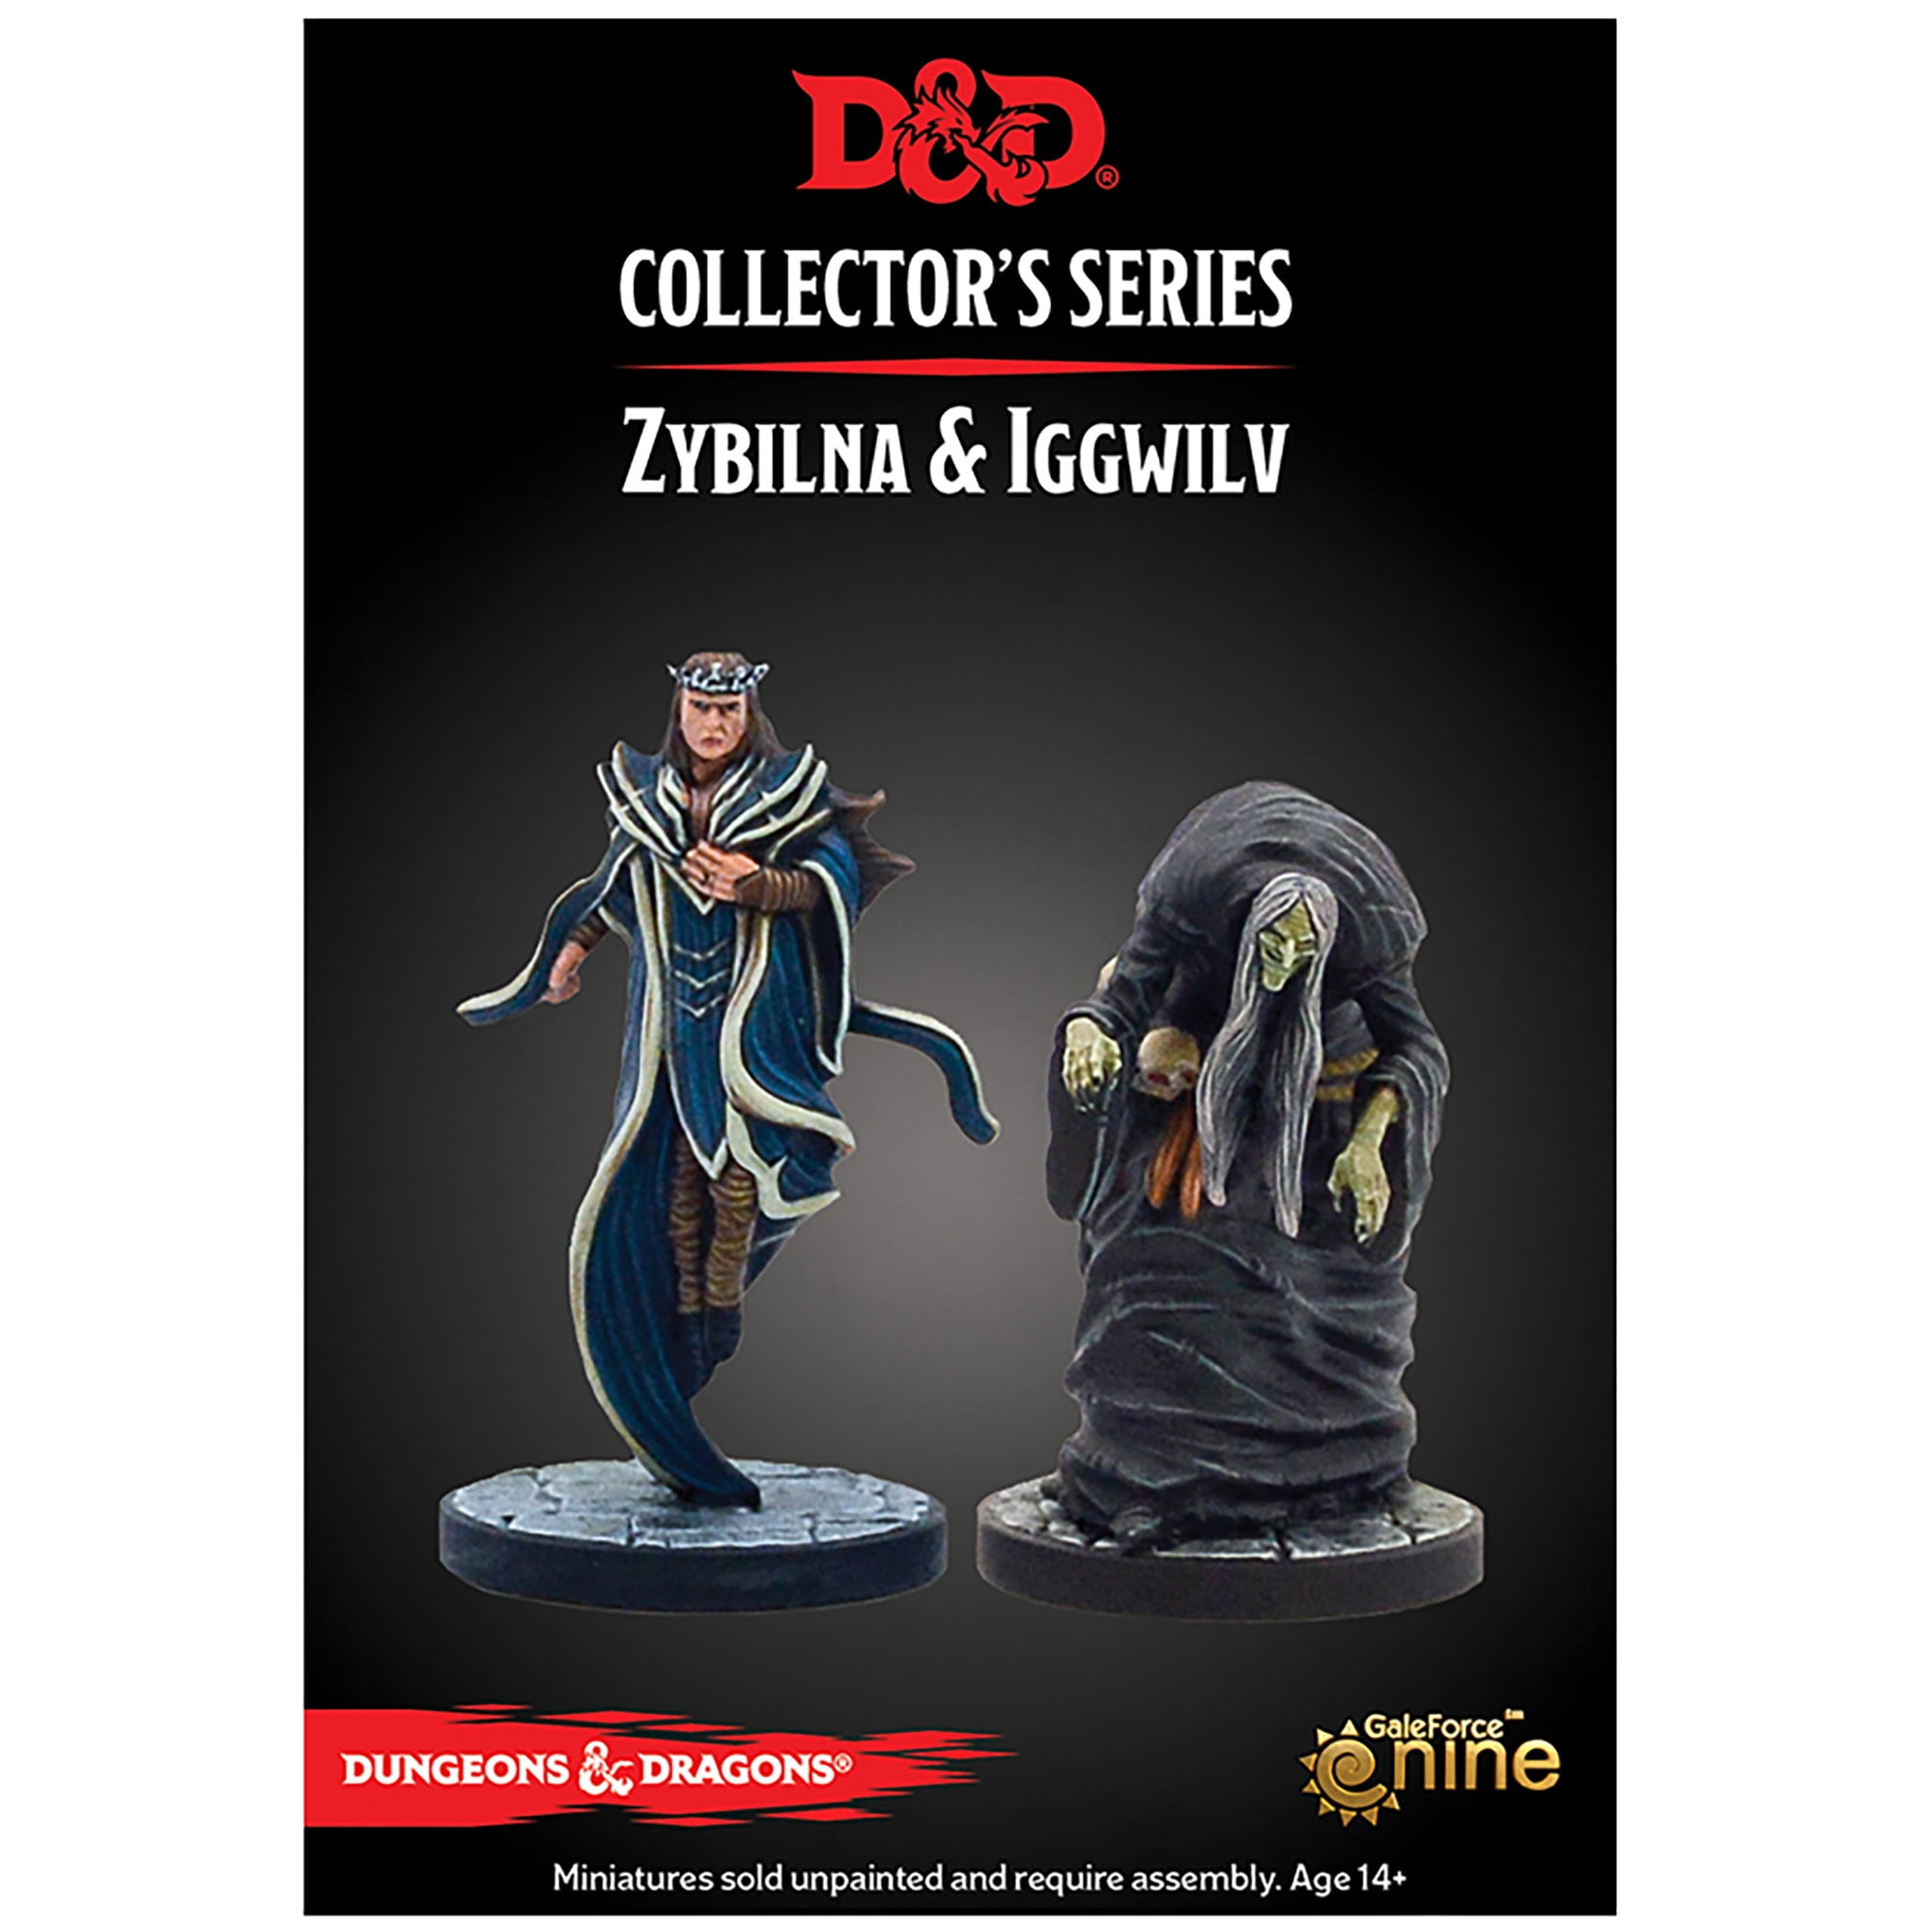 Picture of Gale Force 9 GF971136 Zybilna & Iggwilv Dungeons & Dragons Miniatures